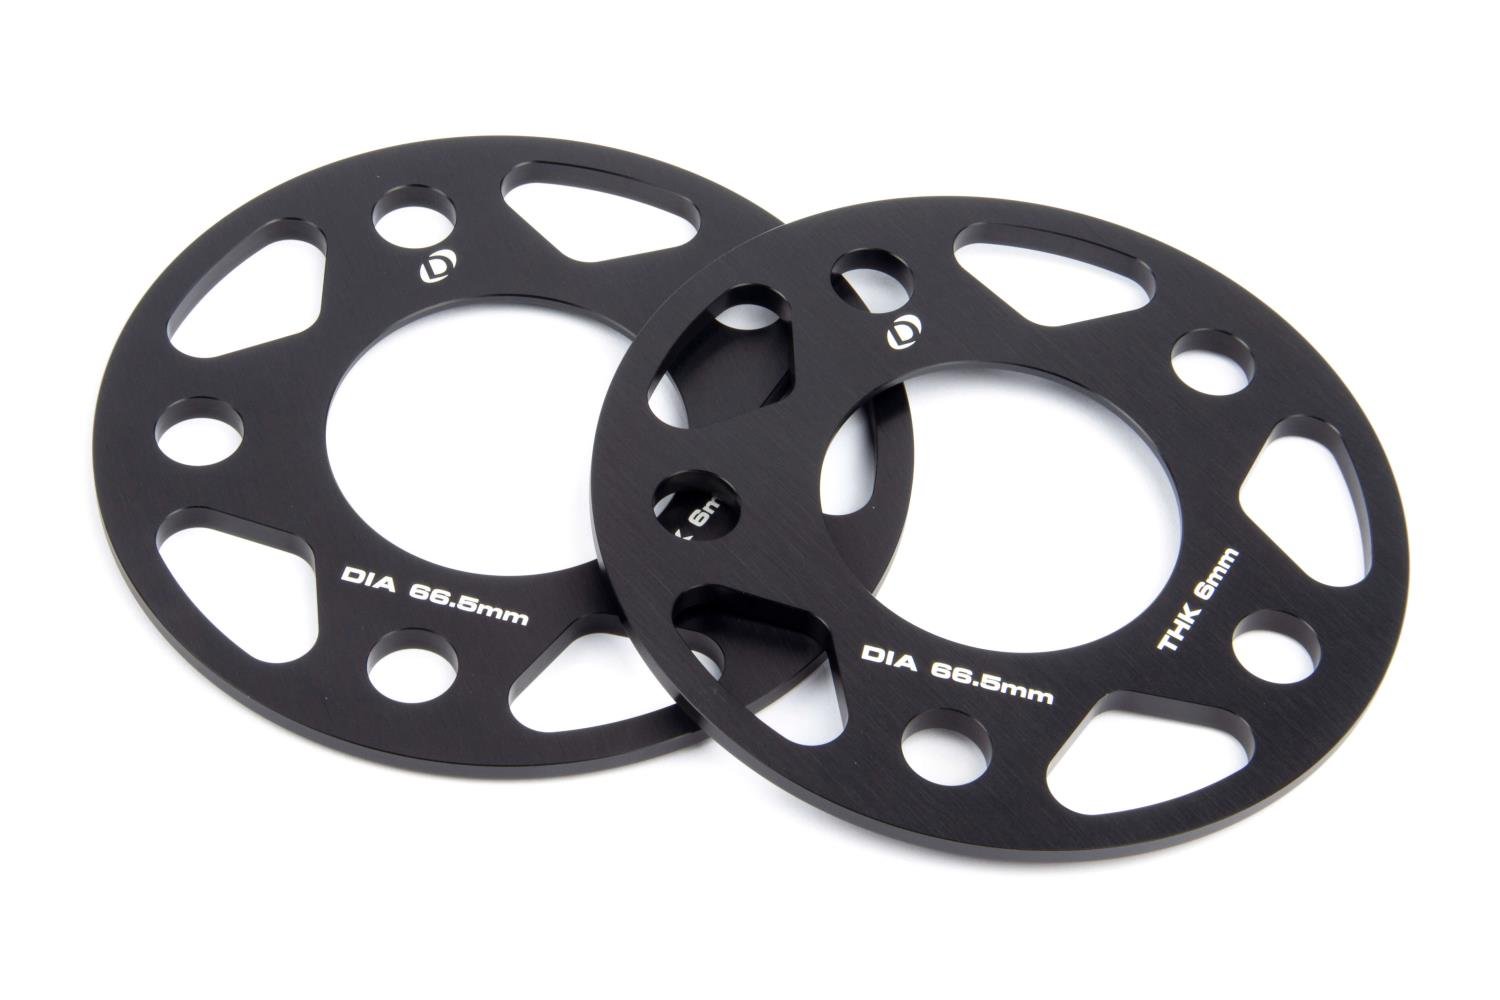 Machined Aluminum Wheel Spacers [6 mm Thick] for Select Late-Model BMW Cars/SUVs, Mini Cooper, Toyota GR Supra  [Black]